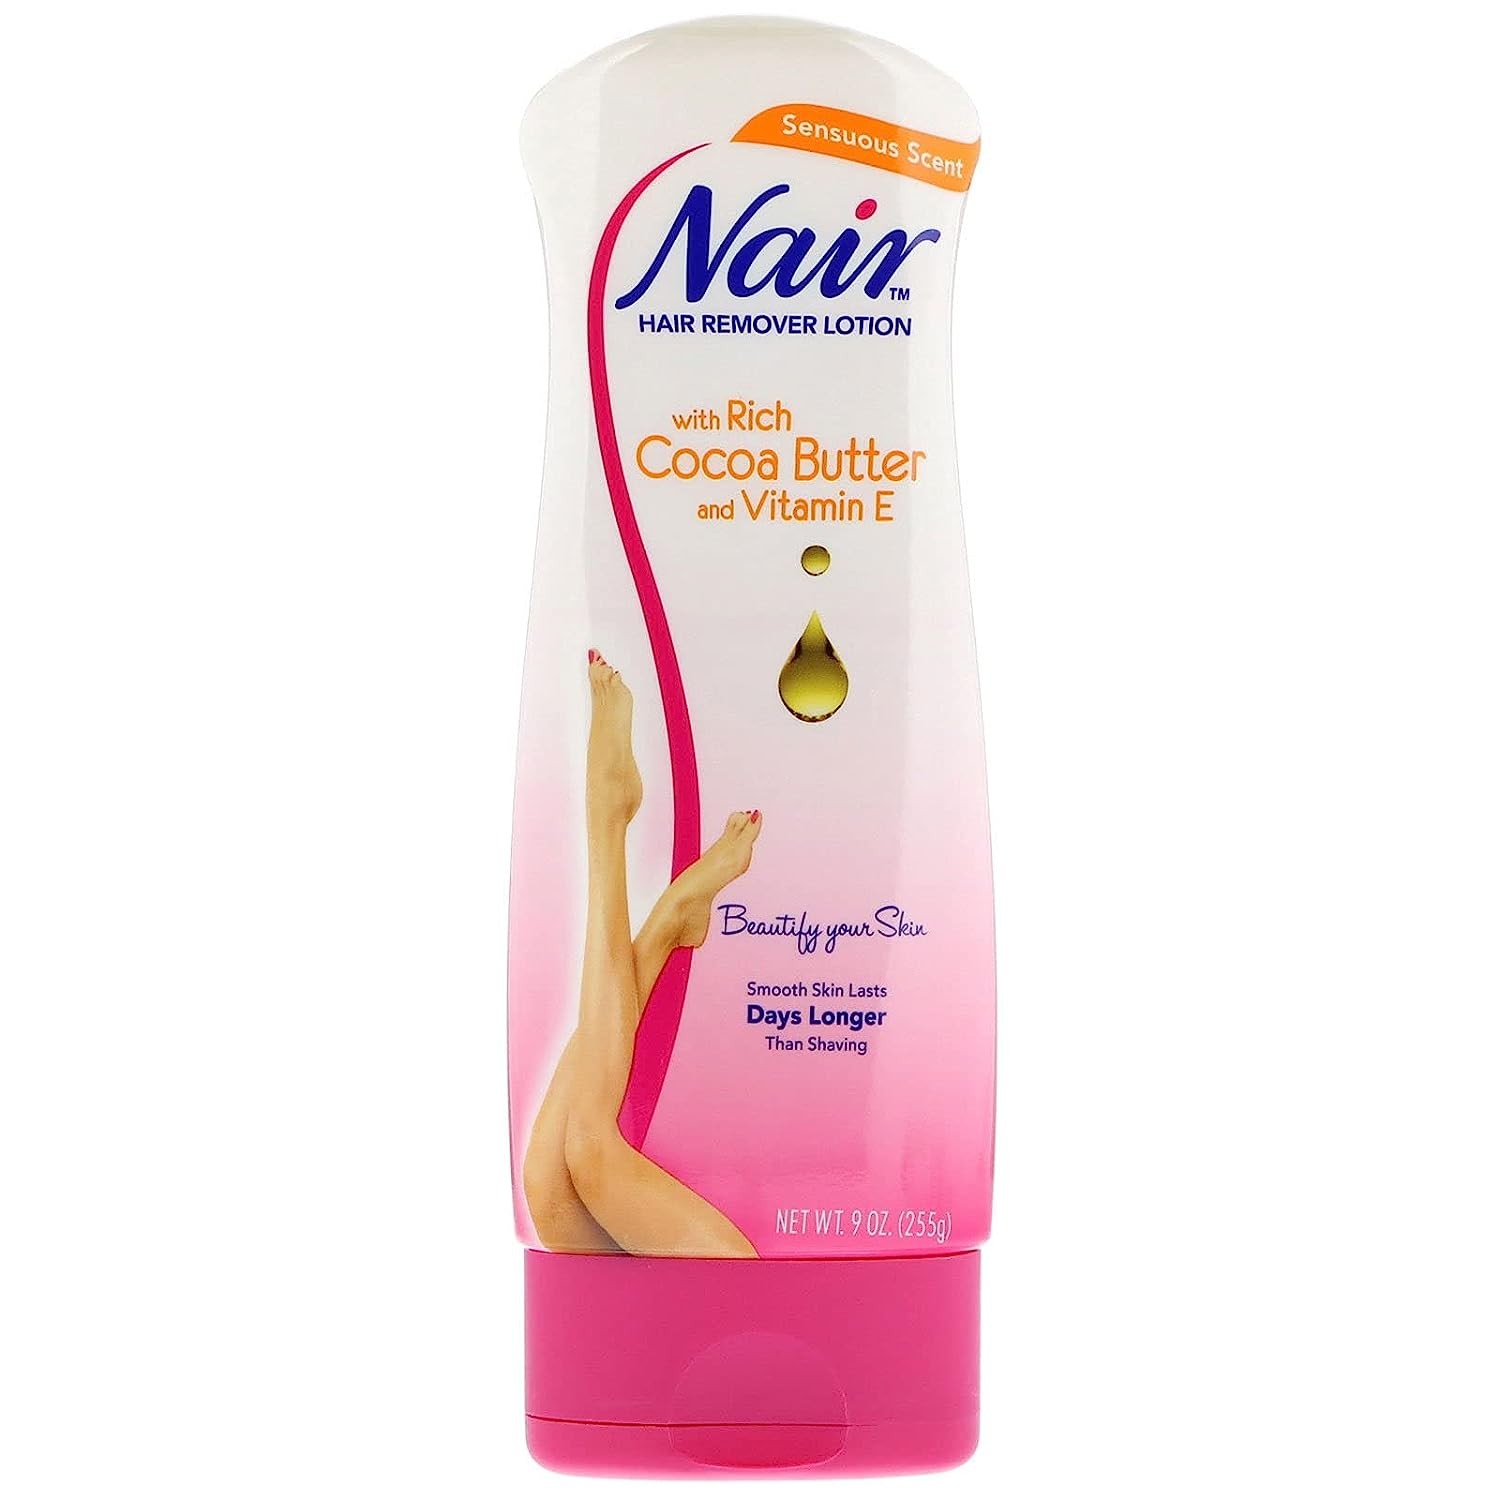 Nair Hair Remover Lotion with Cocoa Butter, 9 oz